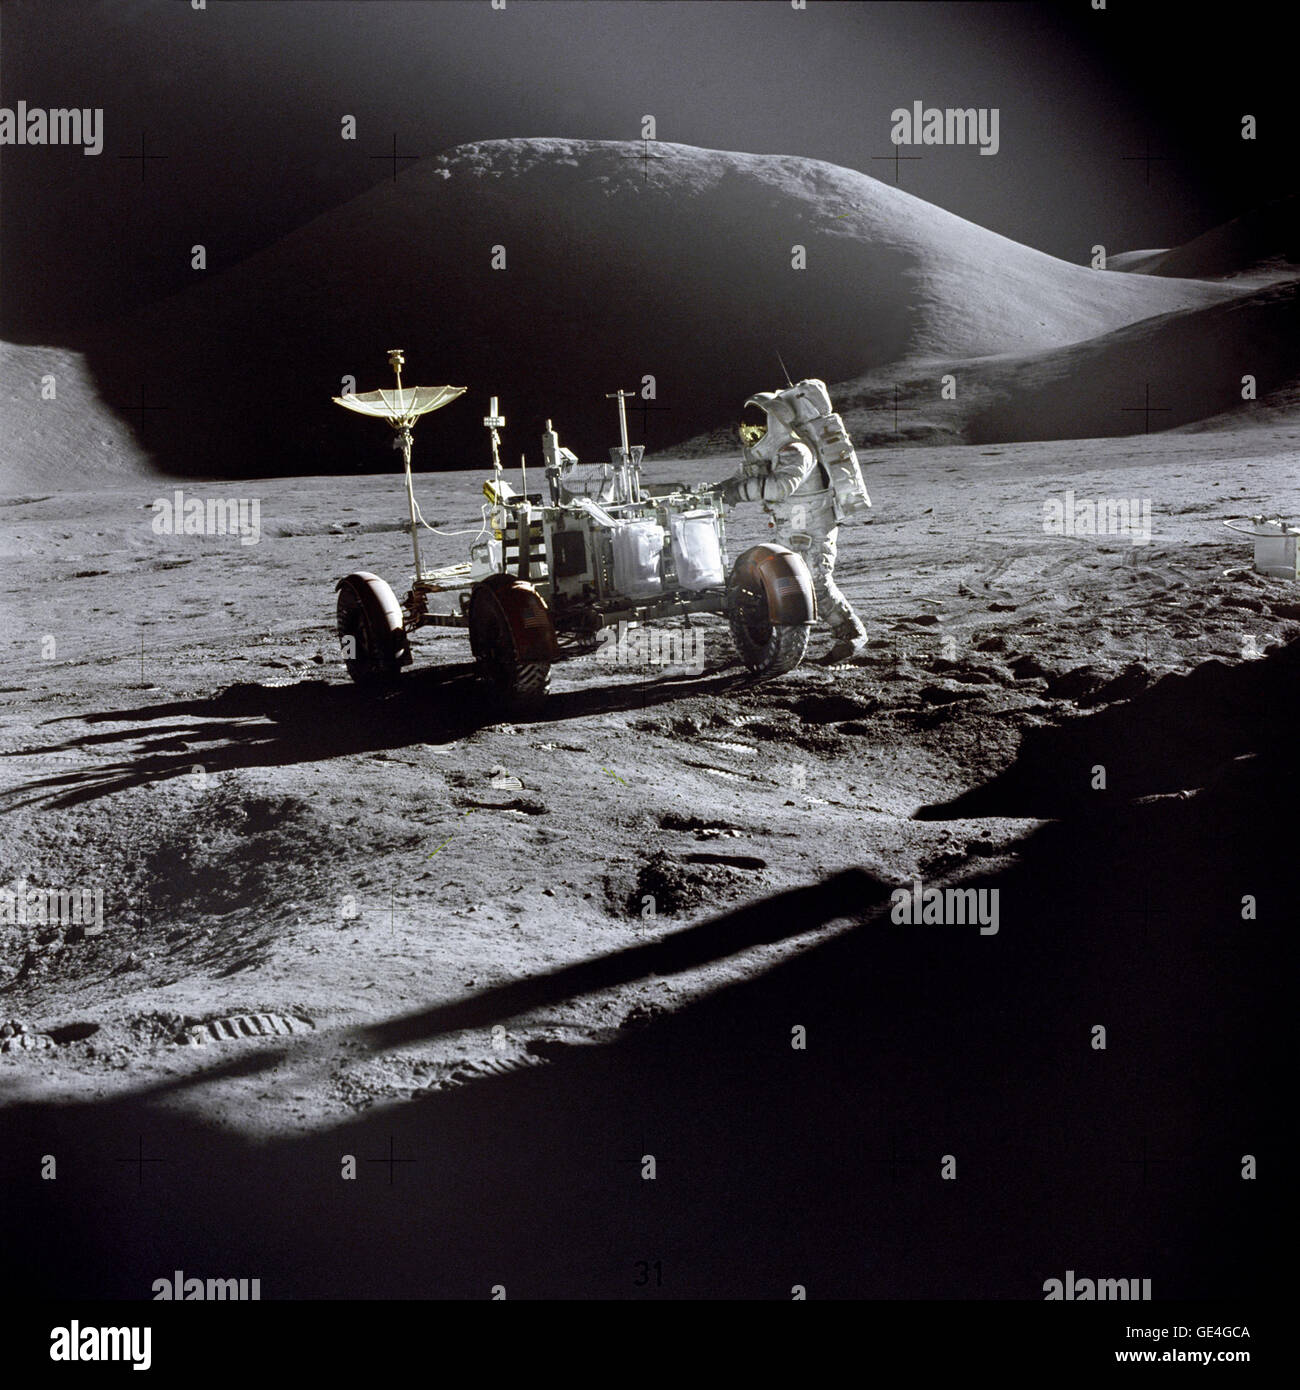 Astronaut James B. Irwin, Lunar Module pilot, works at the Lunar Roving Vehicle during the first Apollo 15 lunar surface extravehicular activity (EVA-1) at the Hadley-Apennine landing site. The shadow of the Lunar Module &quot;Falcon&quot; is in the foreground. This view is looking northeast, with Mount Hadley in the background. This photograph was taken by Astronaut David R. Scott, Commander.   Image # : AS15-86-11603 Stock Photo